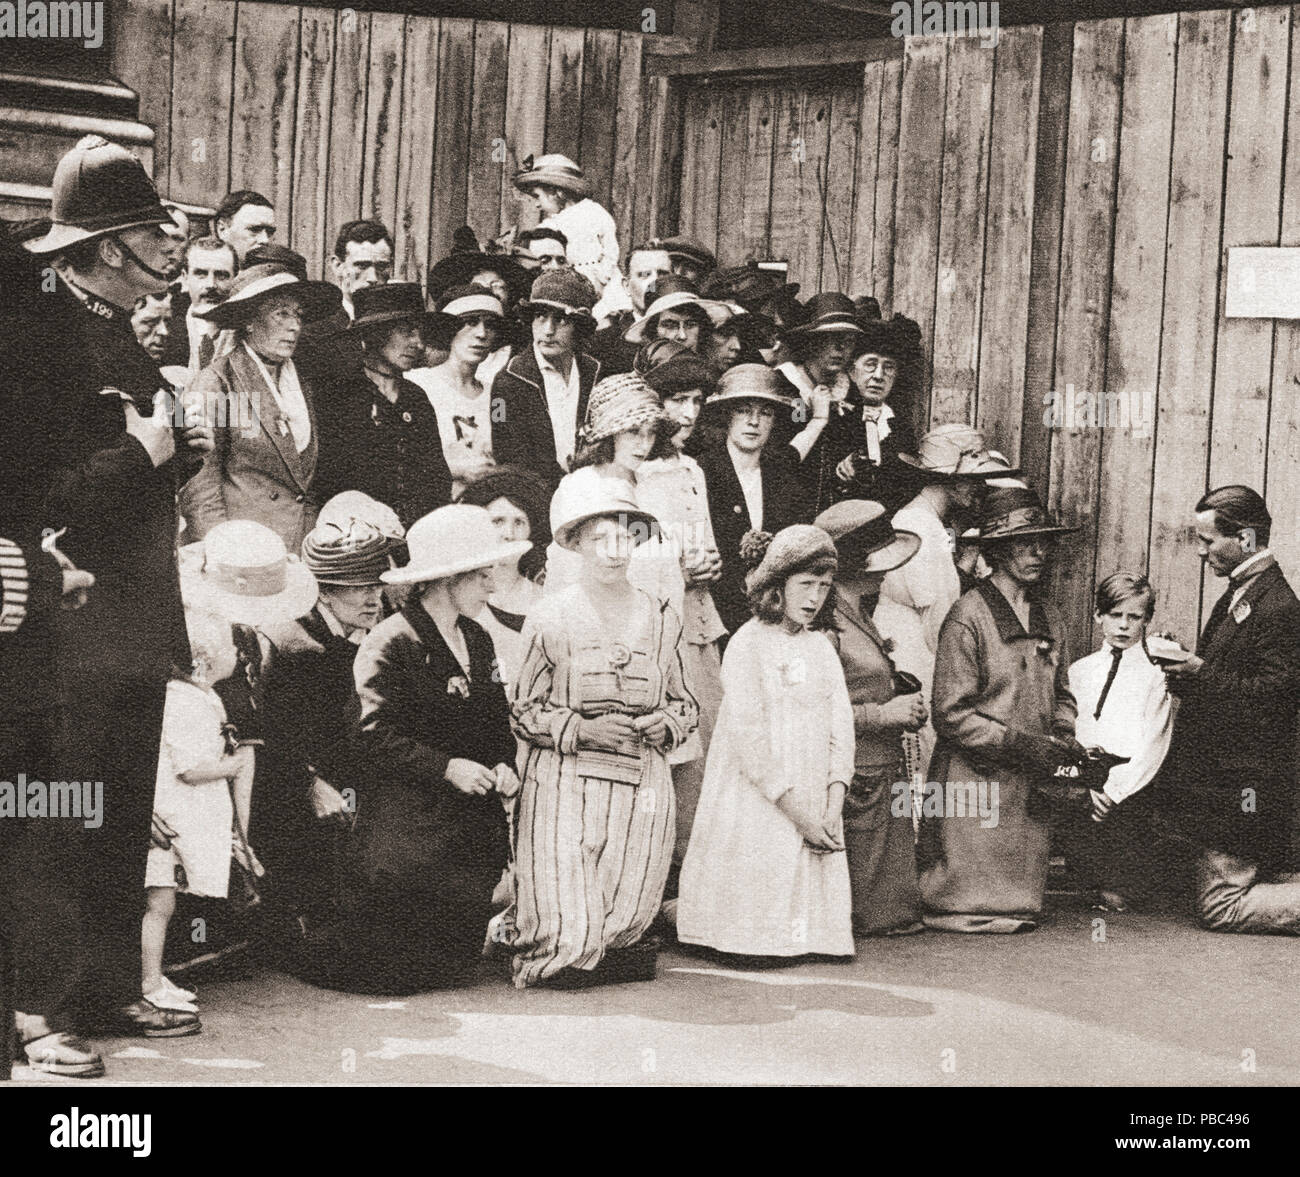 Irish men, women and children on their knees praying in Downing Street during the Anglo-Irish Treaty meetings of 1921.   The Anglo-Irish Treaty aka The Treaty, was an agreement between the government of the United Kingdom of Great Britain and Ireland and representatives of the Irish Republic that ended the Irish War of Independence and provided for the establishment of the Irish Free State.  From These Tremendous Years, published 1938. Stock Photo